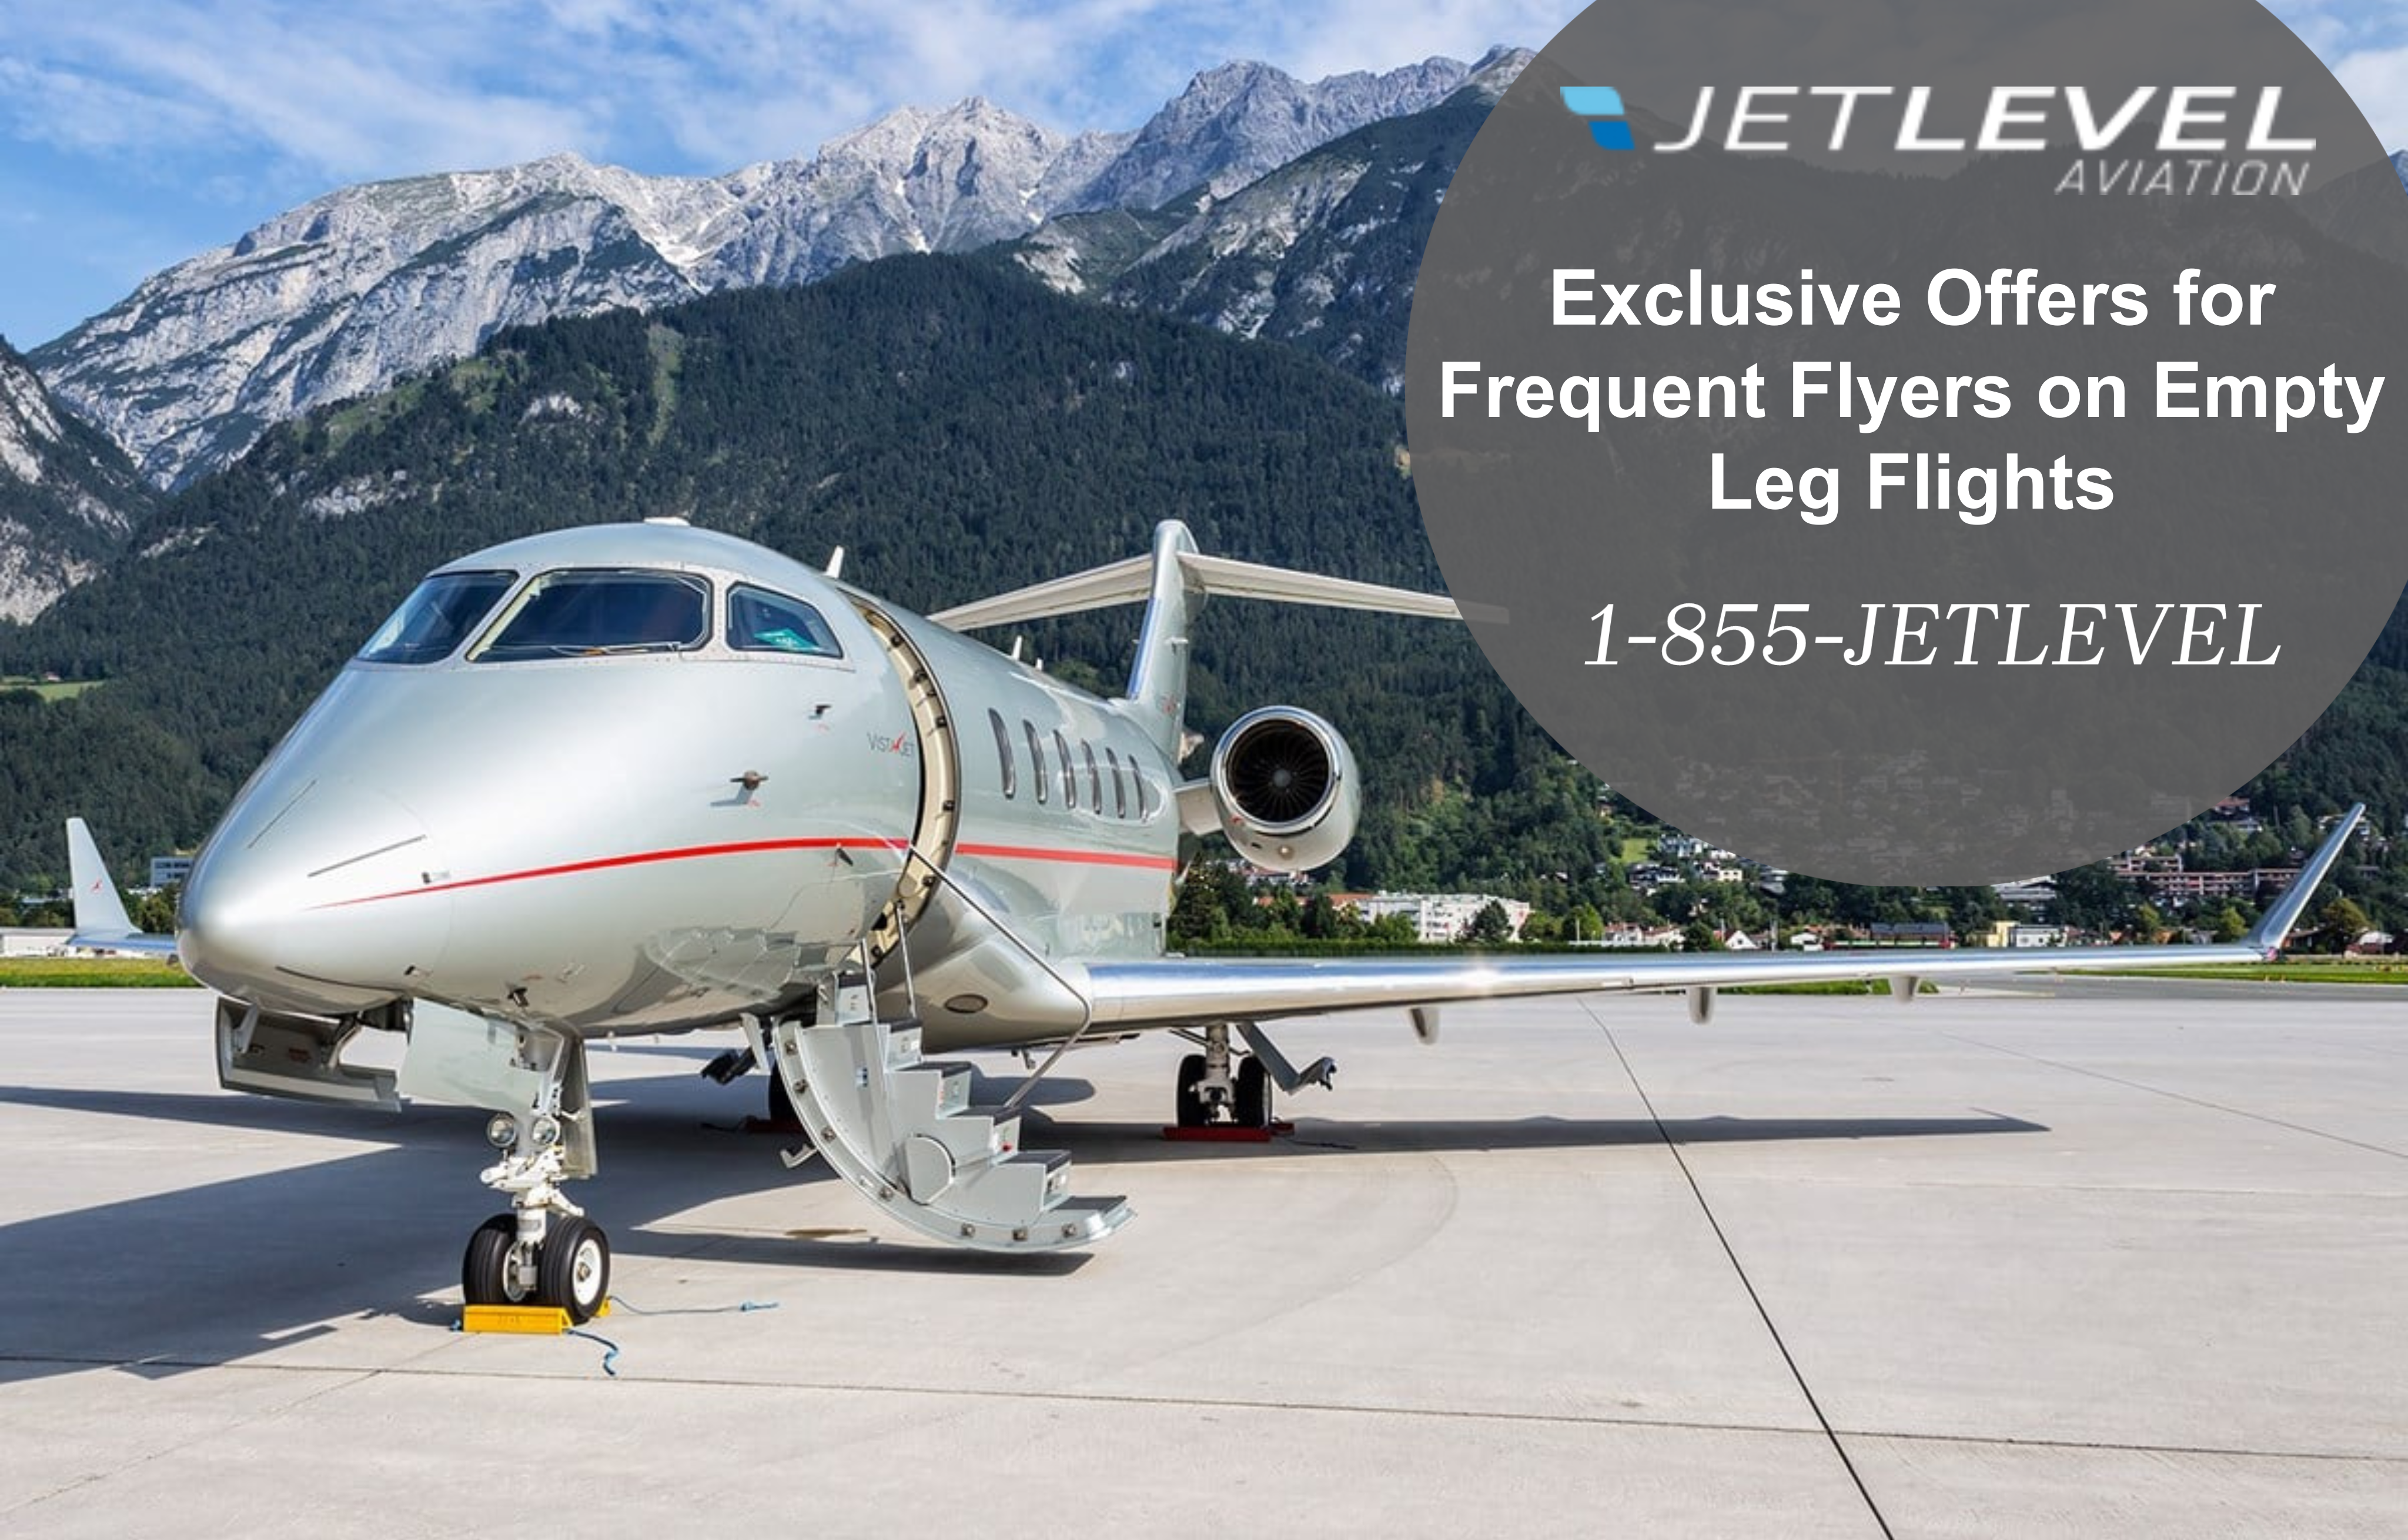 Exclusive Offers for Frequent Flyers on Empty Leg Flights